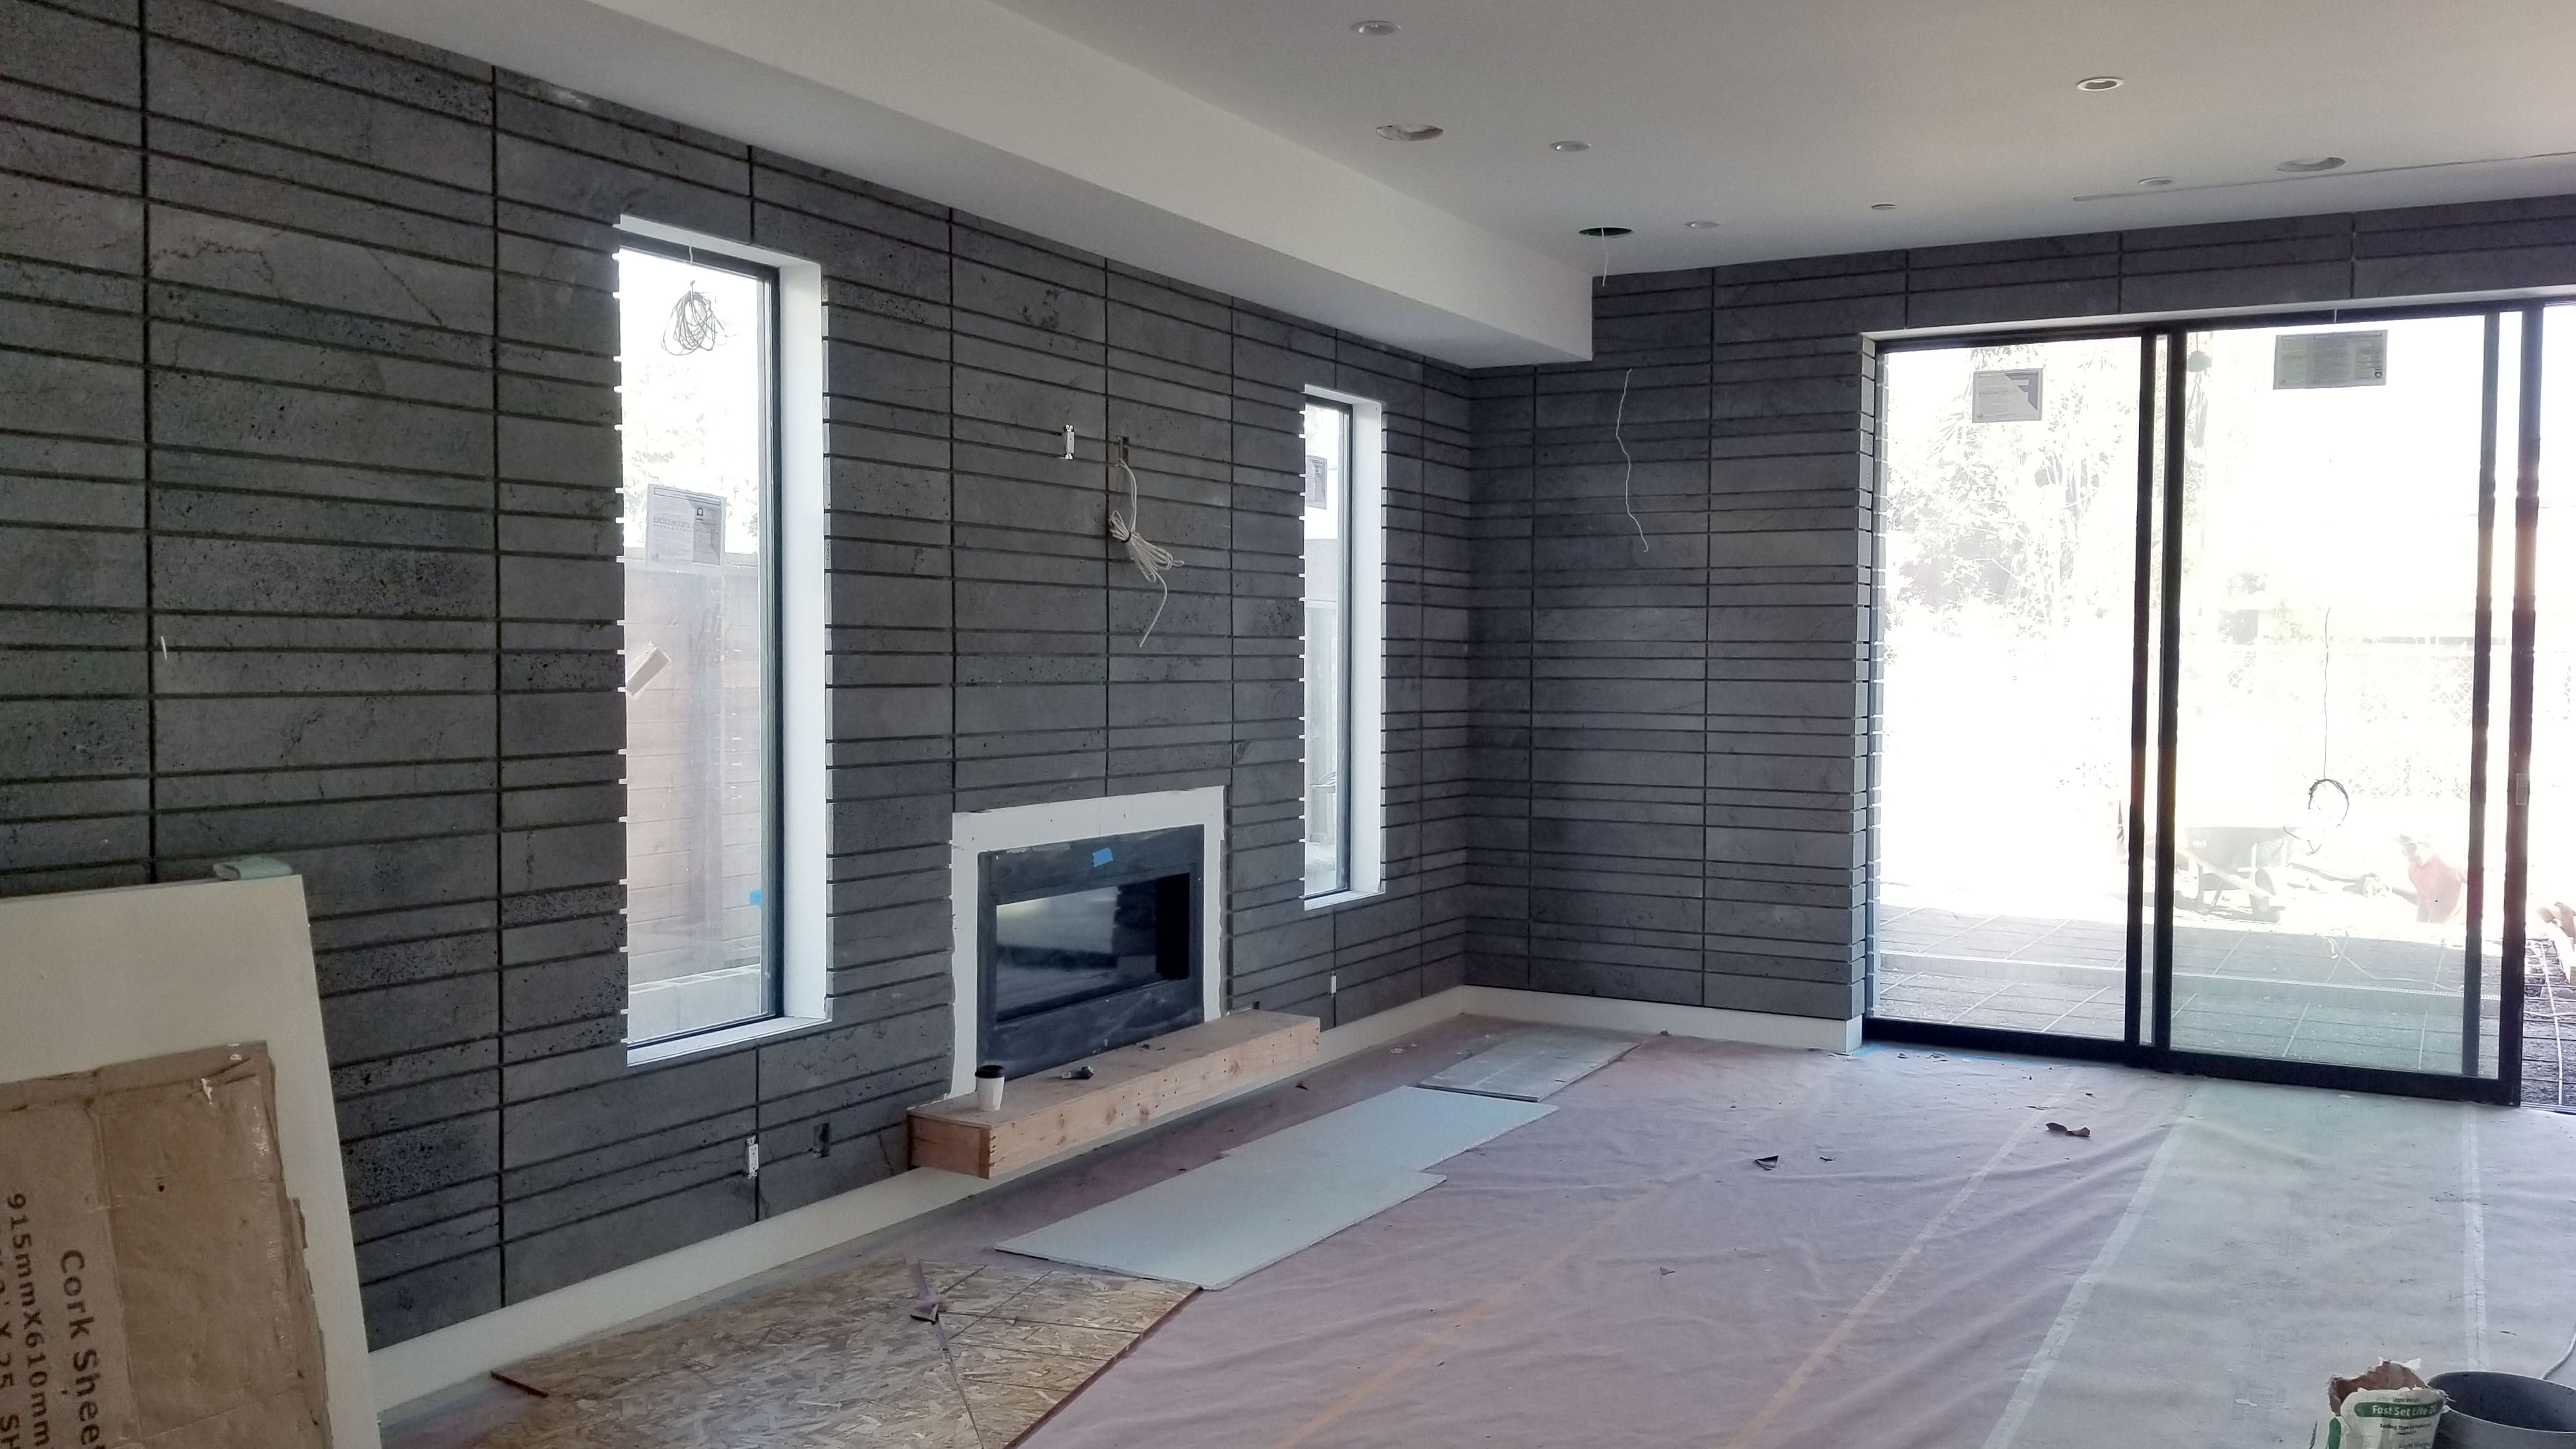 Norstone Planc Large Format Tile on interior feature wall with fireplace in Hollywood, CA